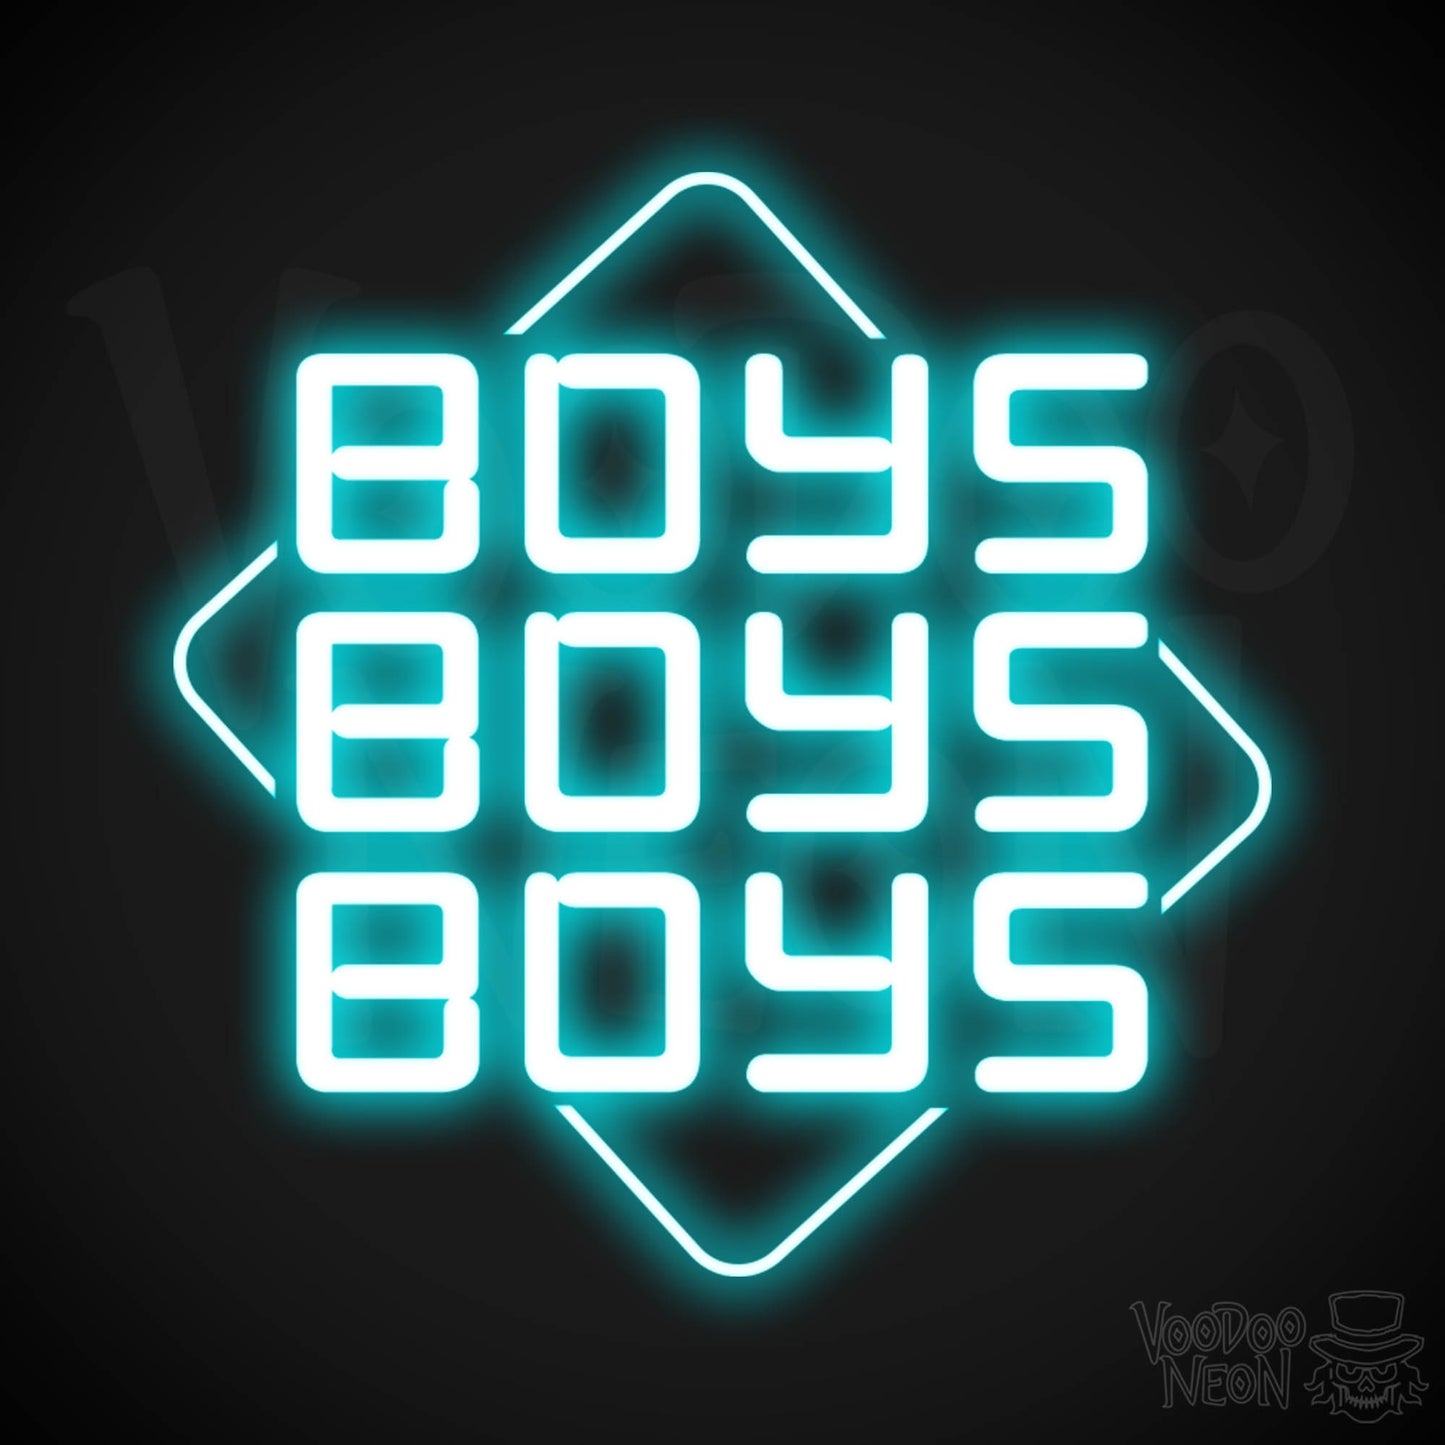 Boys Boys Boys Neon Sign - Neon Boys Boys Boys Sign - Neon Wall Art - Color Ice Blue